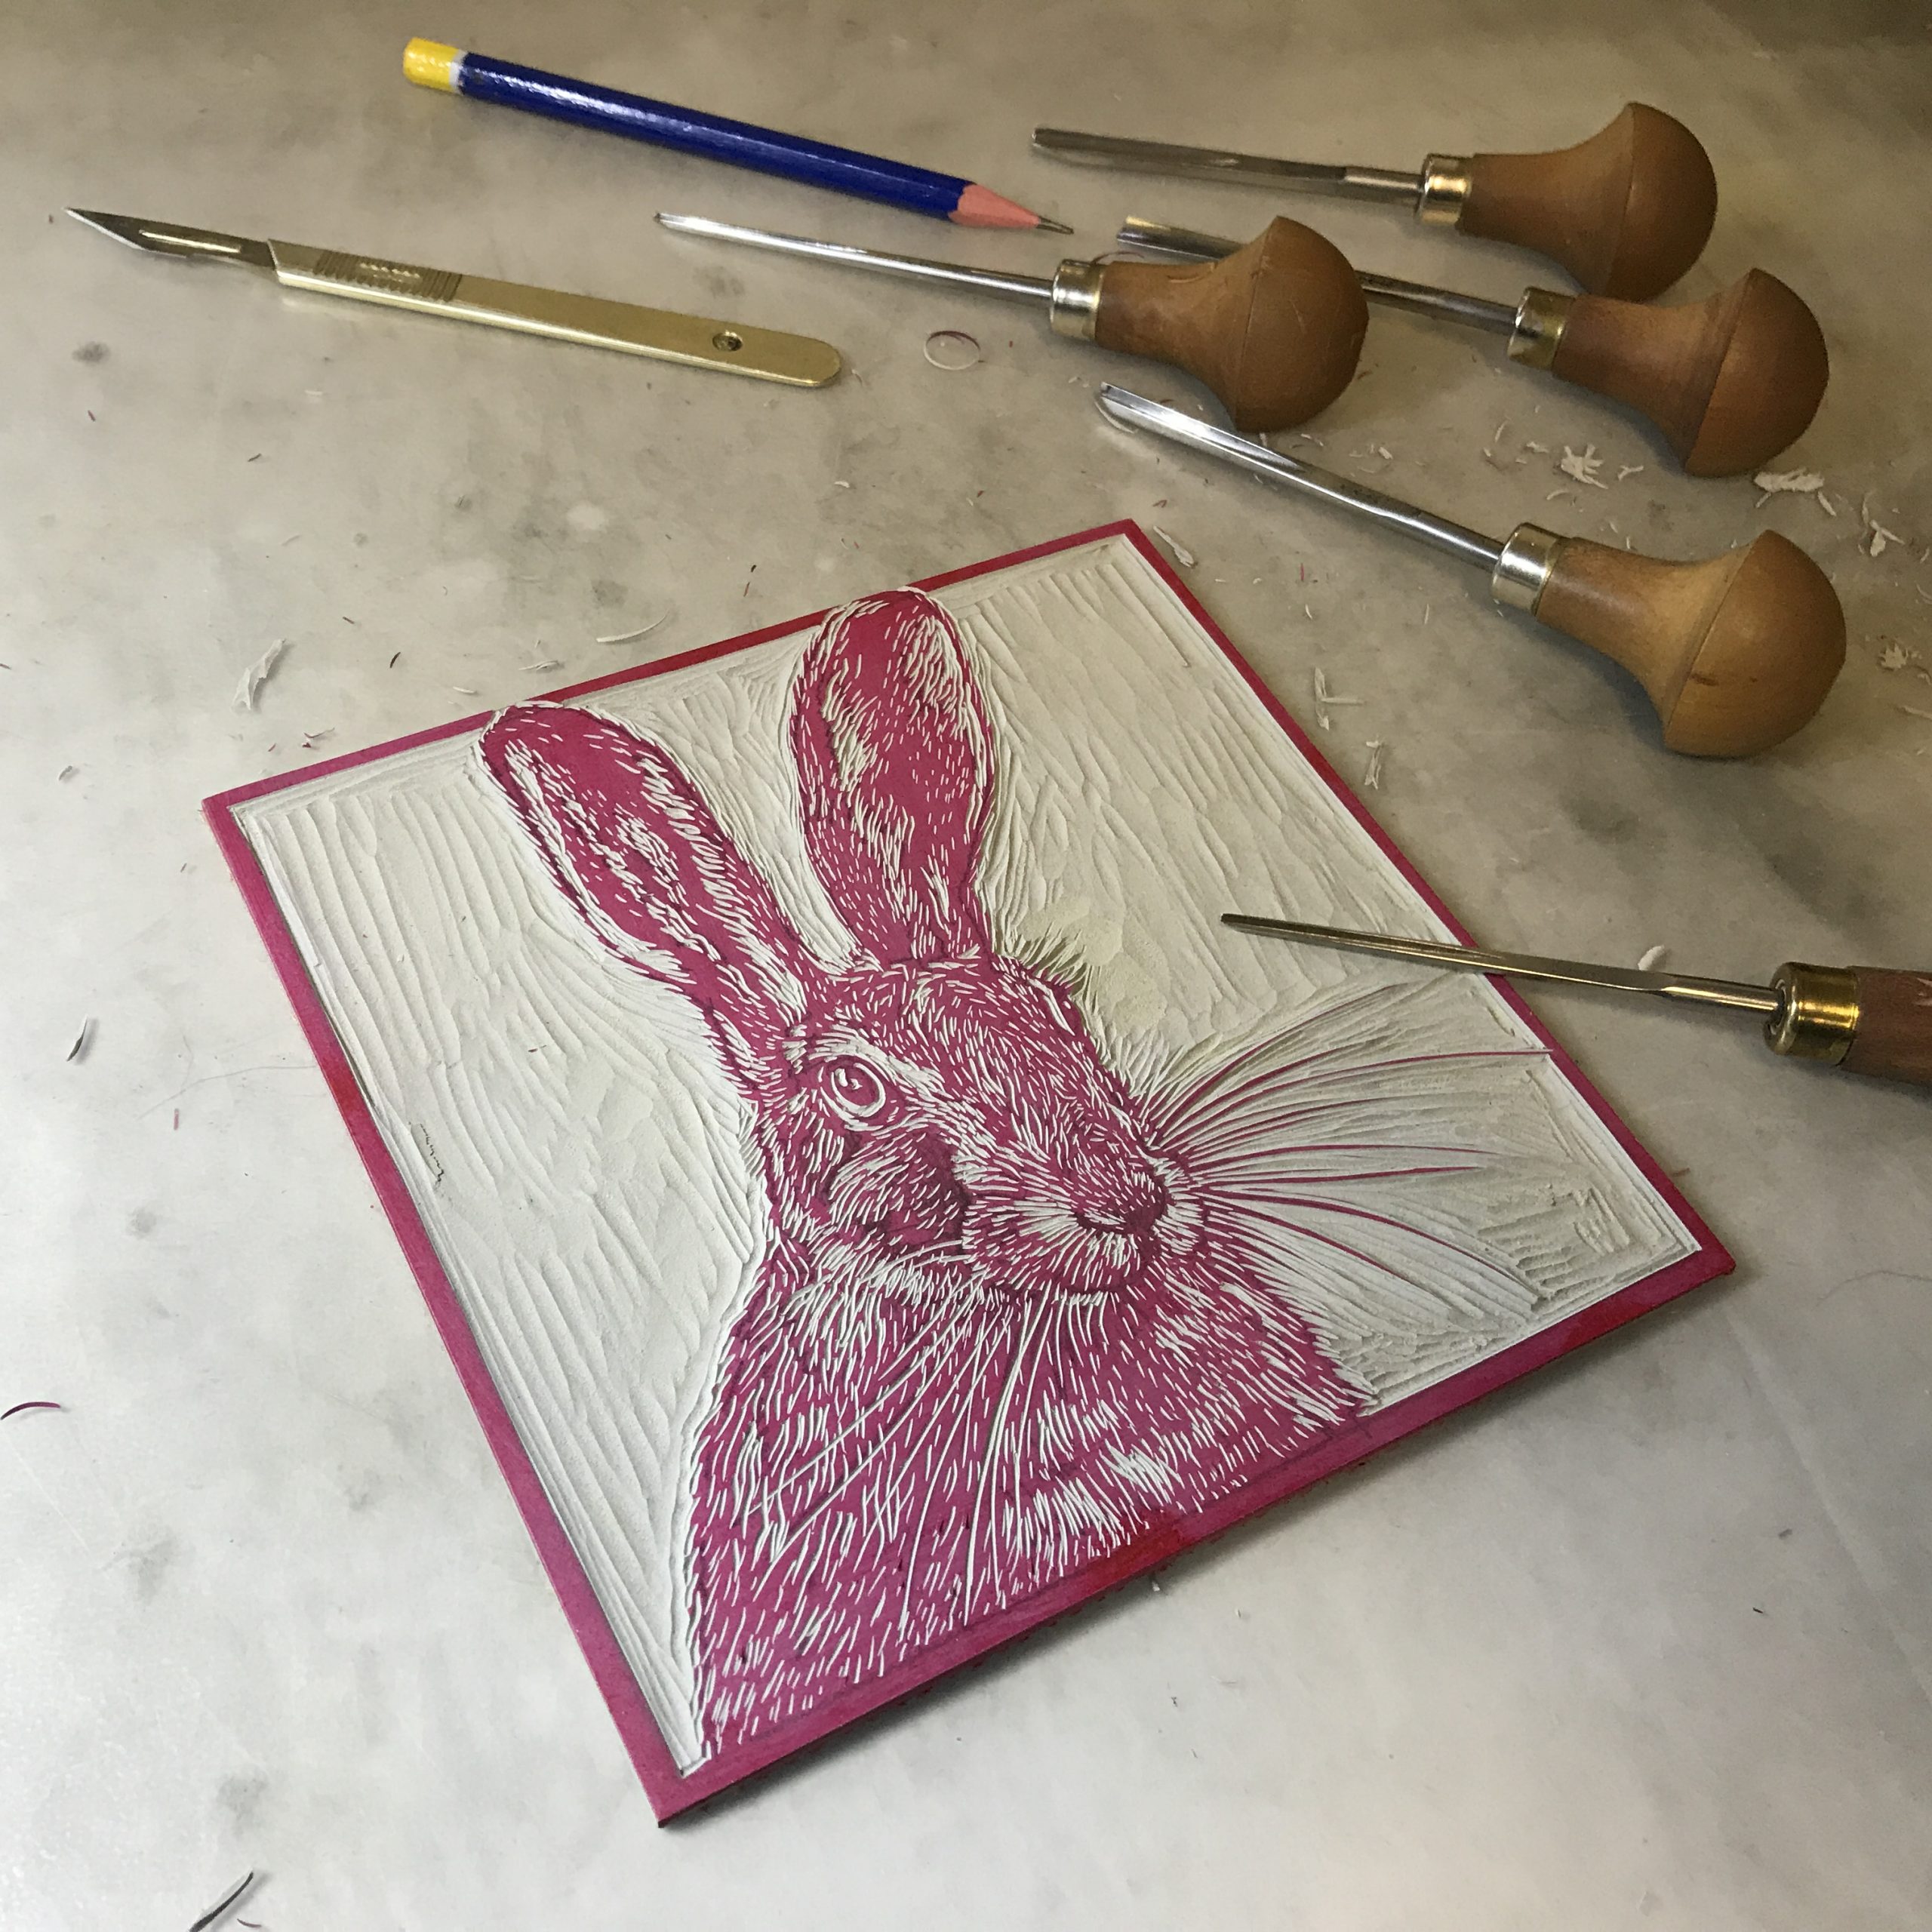 Lino Printing: Tools And Techniques